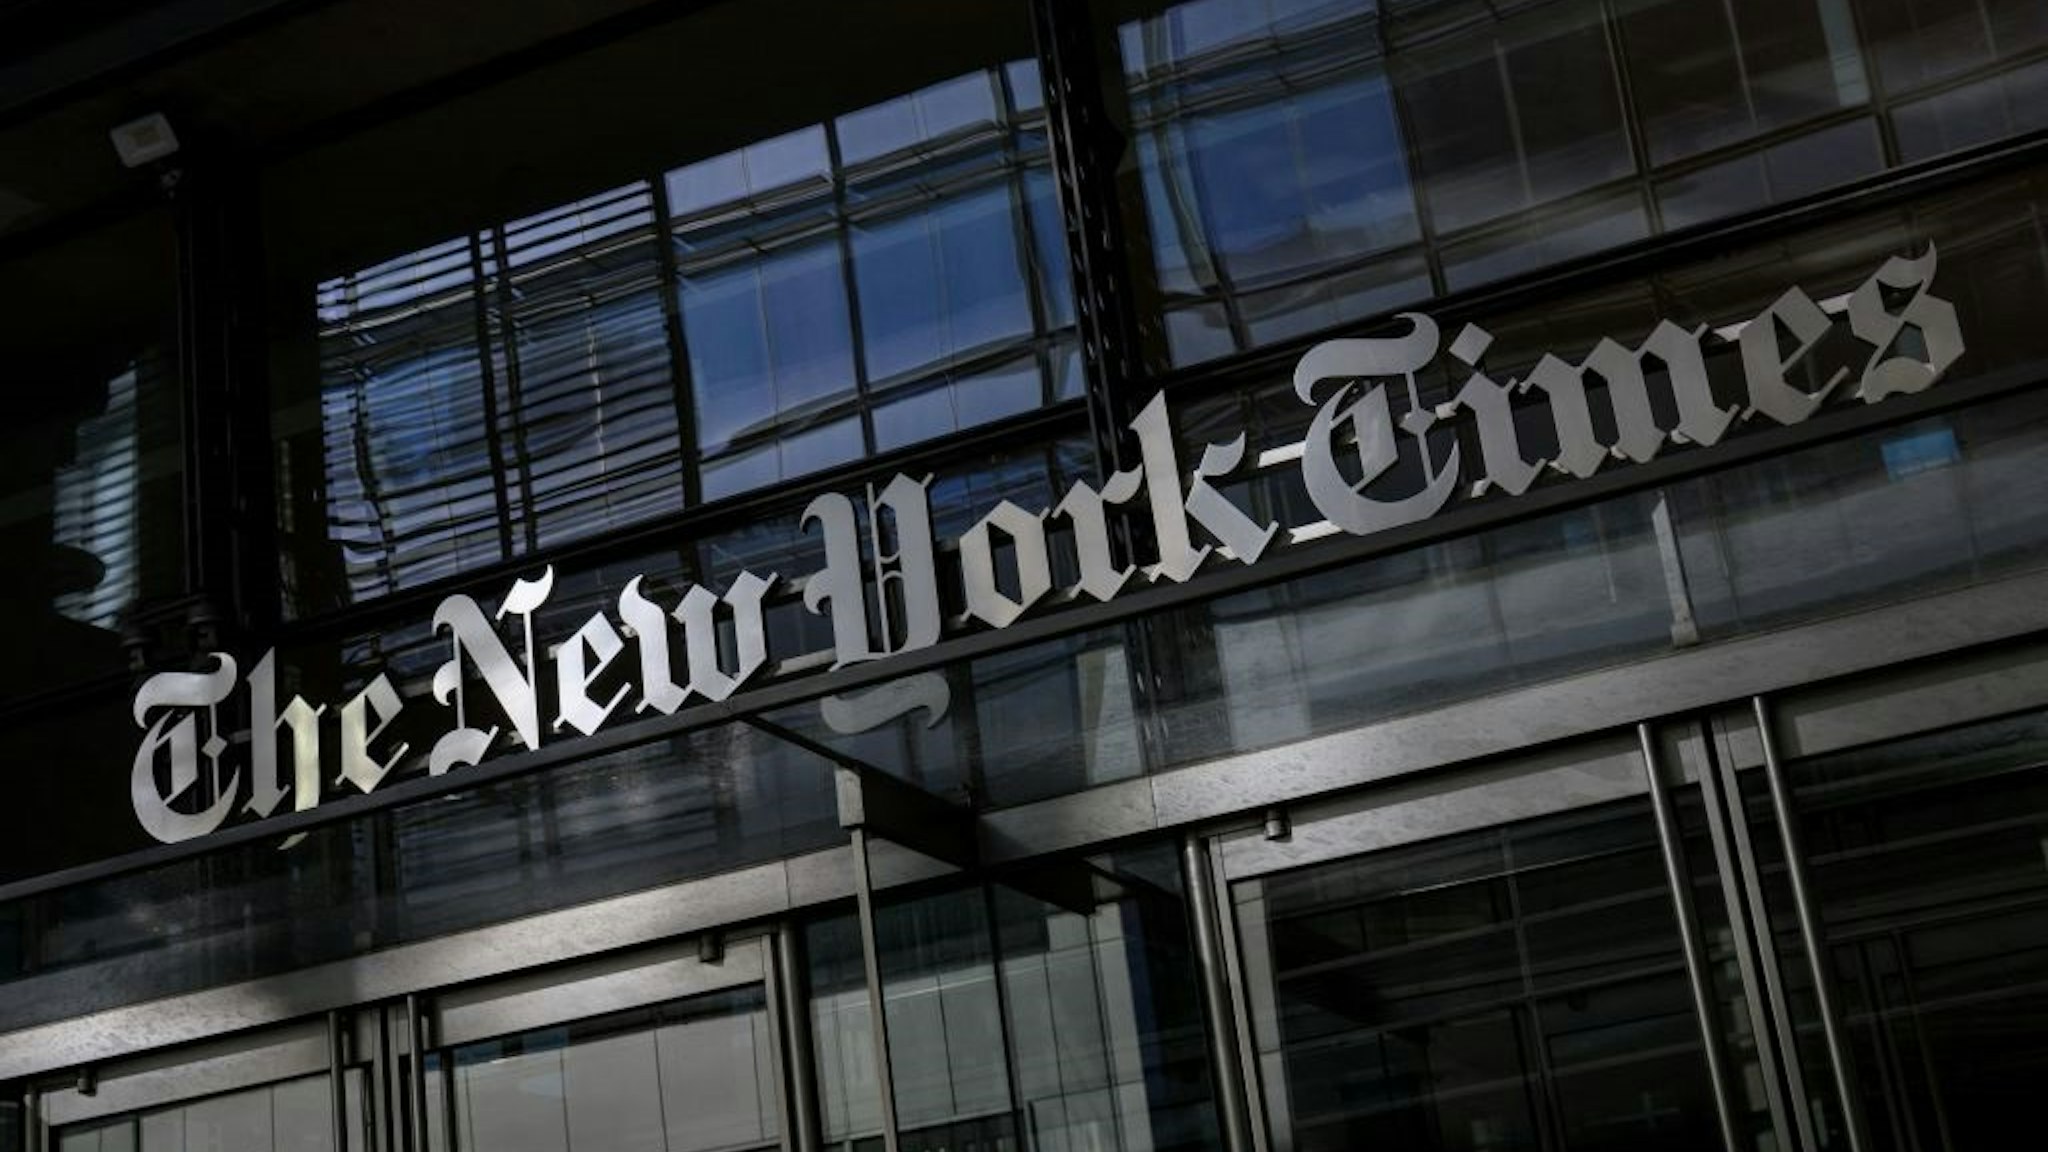 The New York Times Building in New York City on February 1, 2022. - The New York Times announced on January 31, 2022, it had bought Wordle, a phenomenon played by millions just four months after the game burst onto the Internet, for an "undisclosed price in the low seven figures." Created by engineer Josh Wardle, the game consists of guessing one five-letter word per day in just six tries.